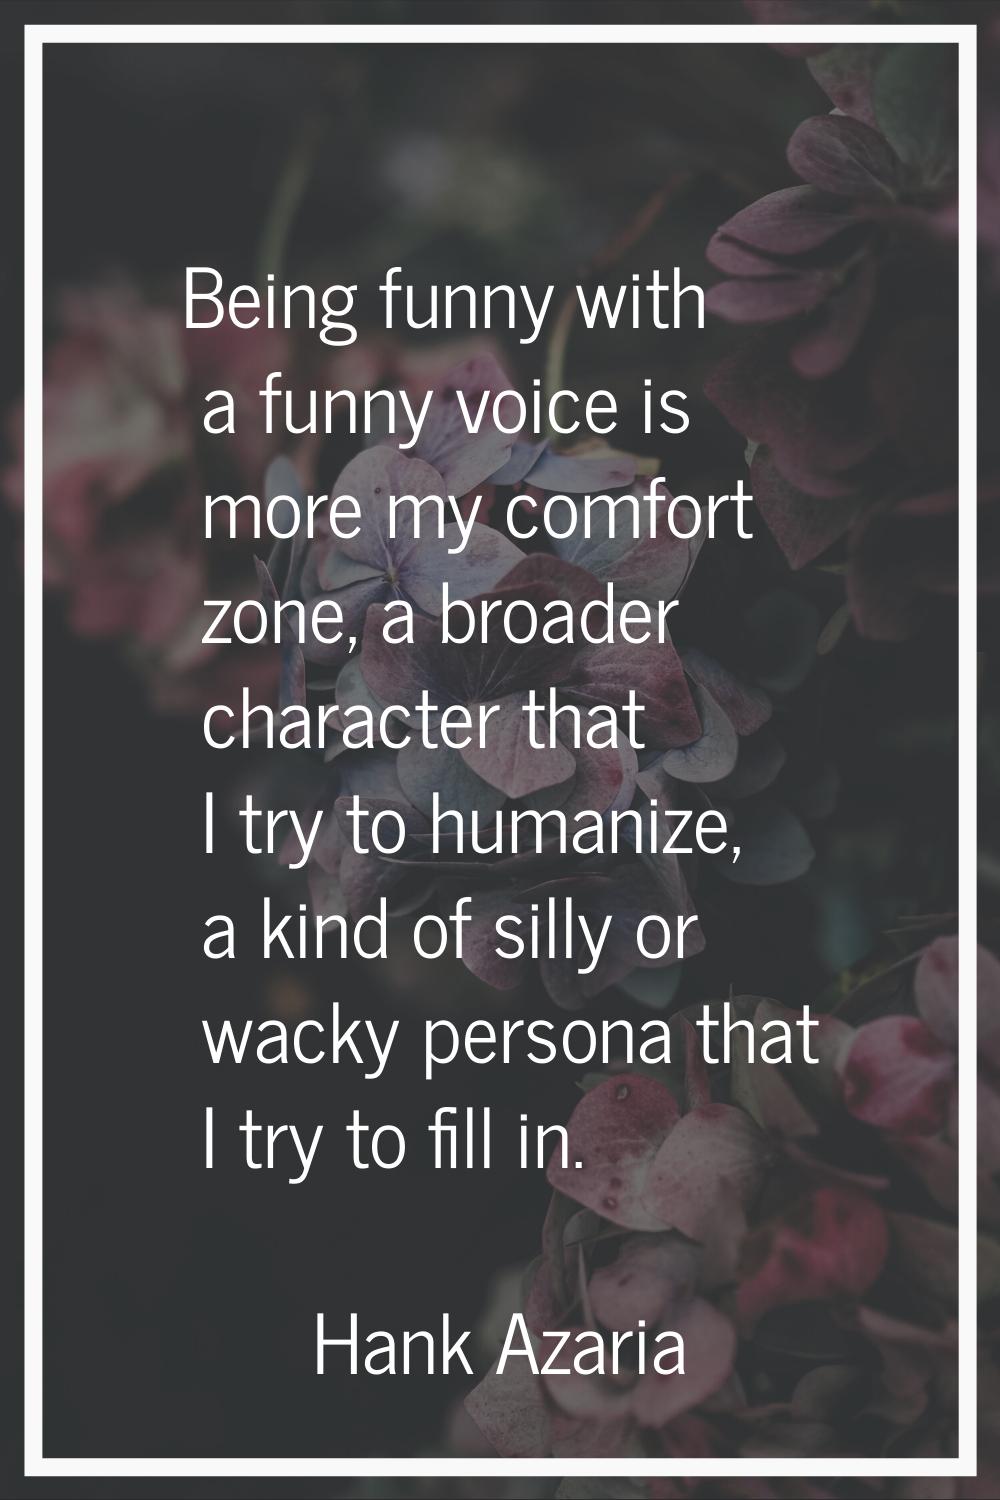 Being funny with a funny voice is more my comfort zone, a broader character that I try to humanize,